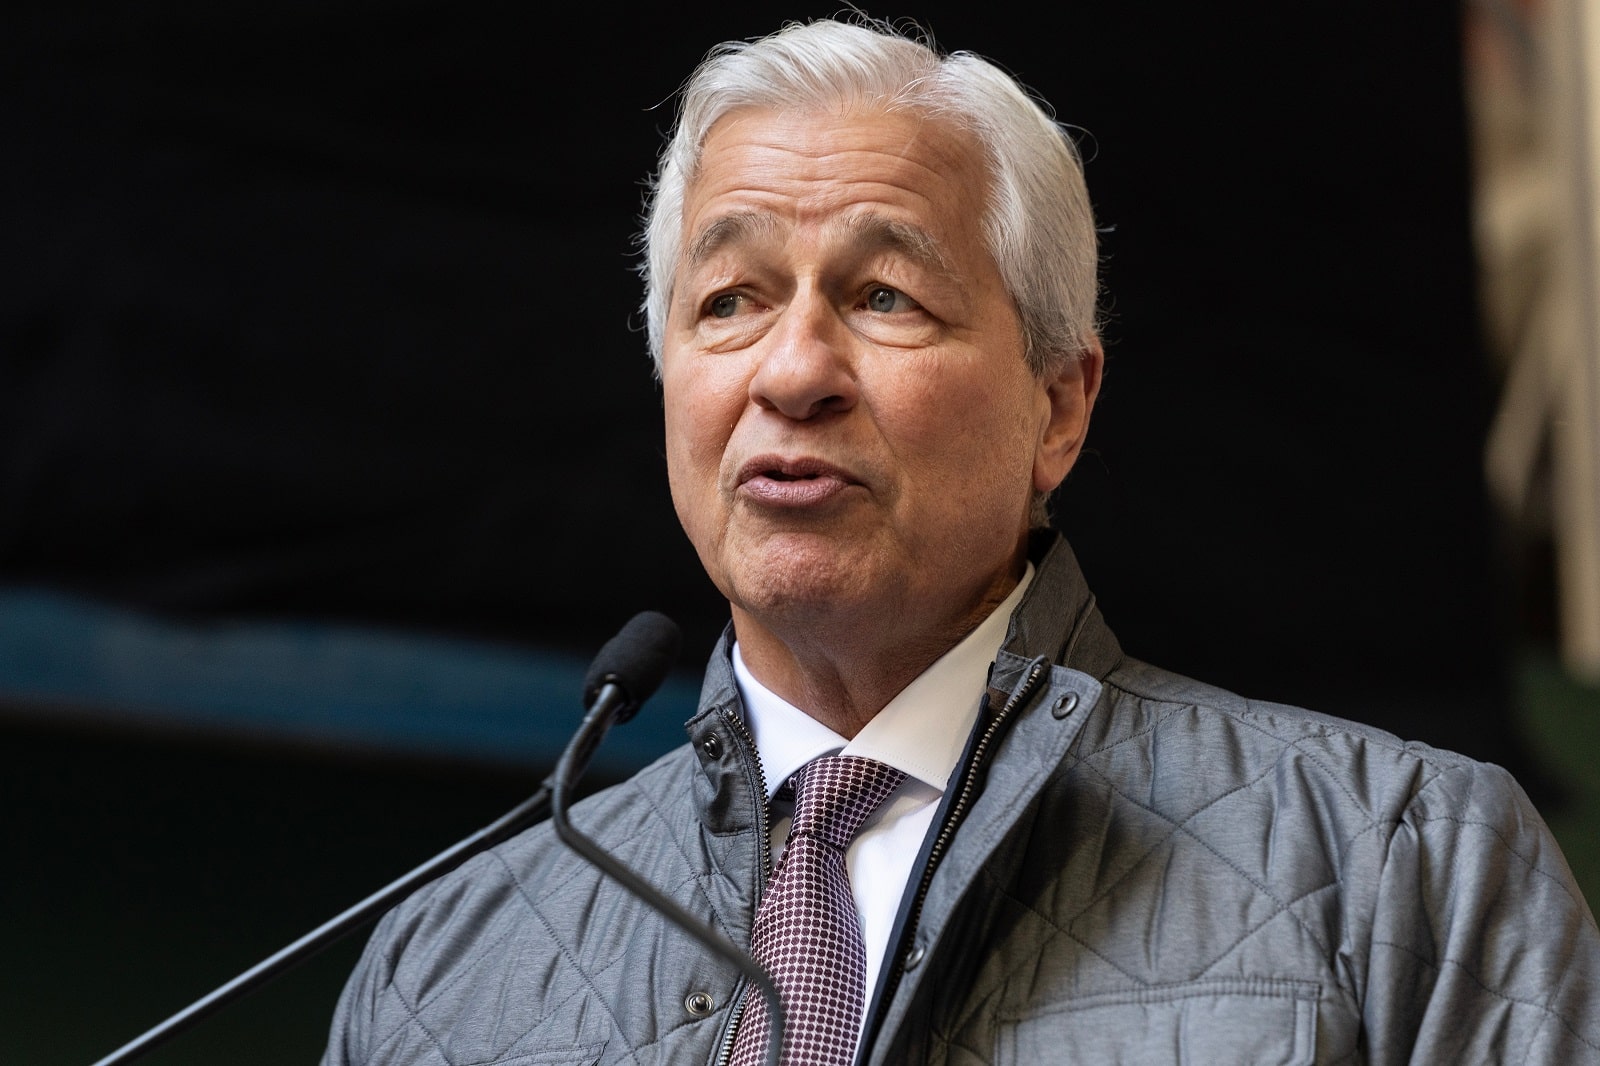 <p><span>Jamie Dimon, CEO of JP Morgan, also set a mandate that all top executives at the firm must return to office duties for five days a week, starting back in April of last year.</span></p>